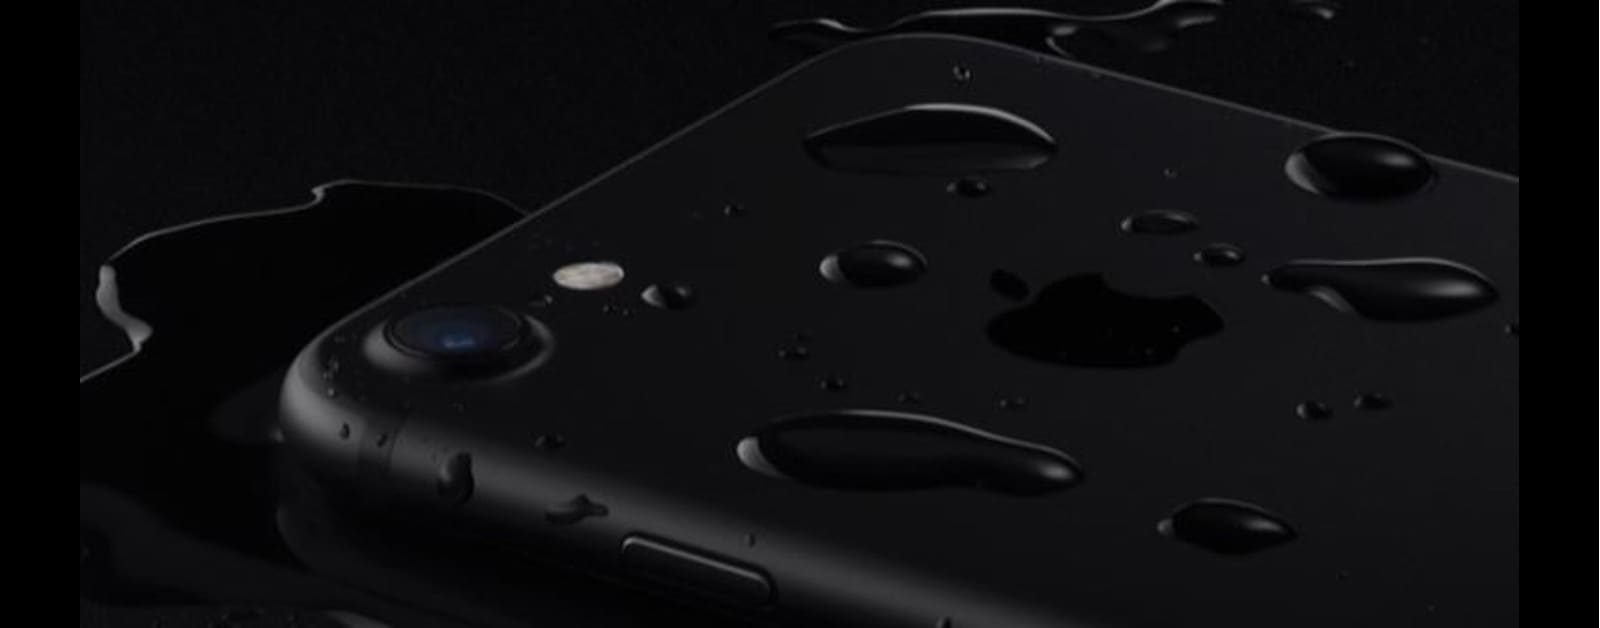 Improve Your iPhone Screen With ProtectPax Liquid on Indiegogo [Update]